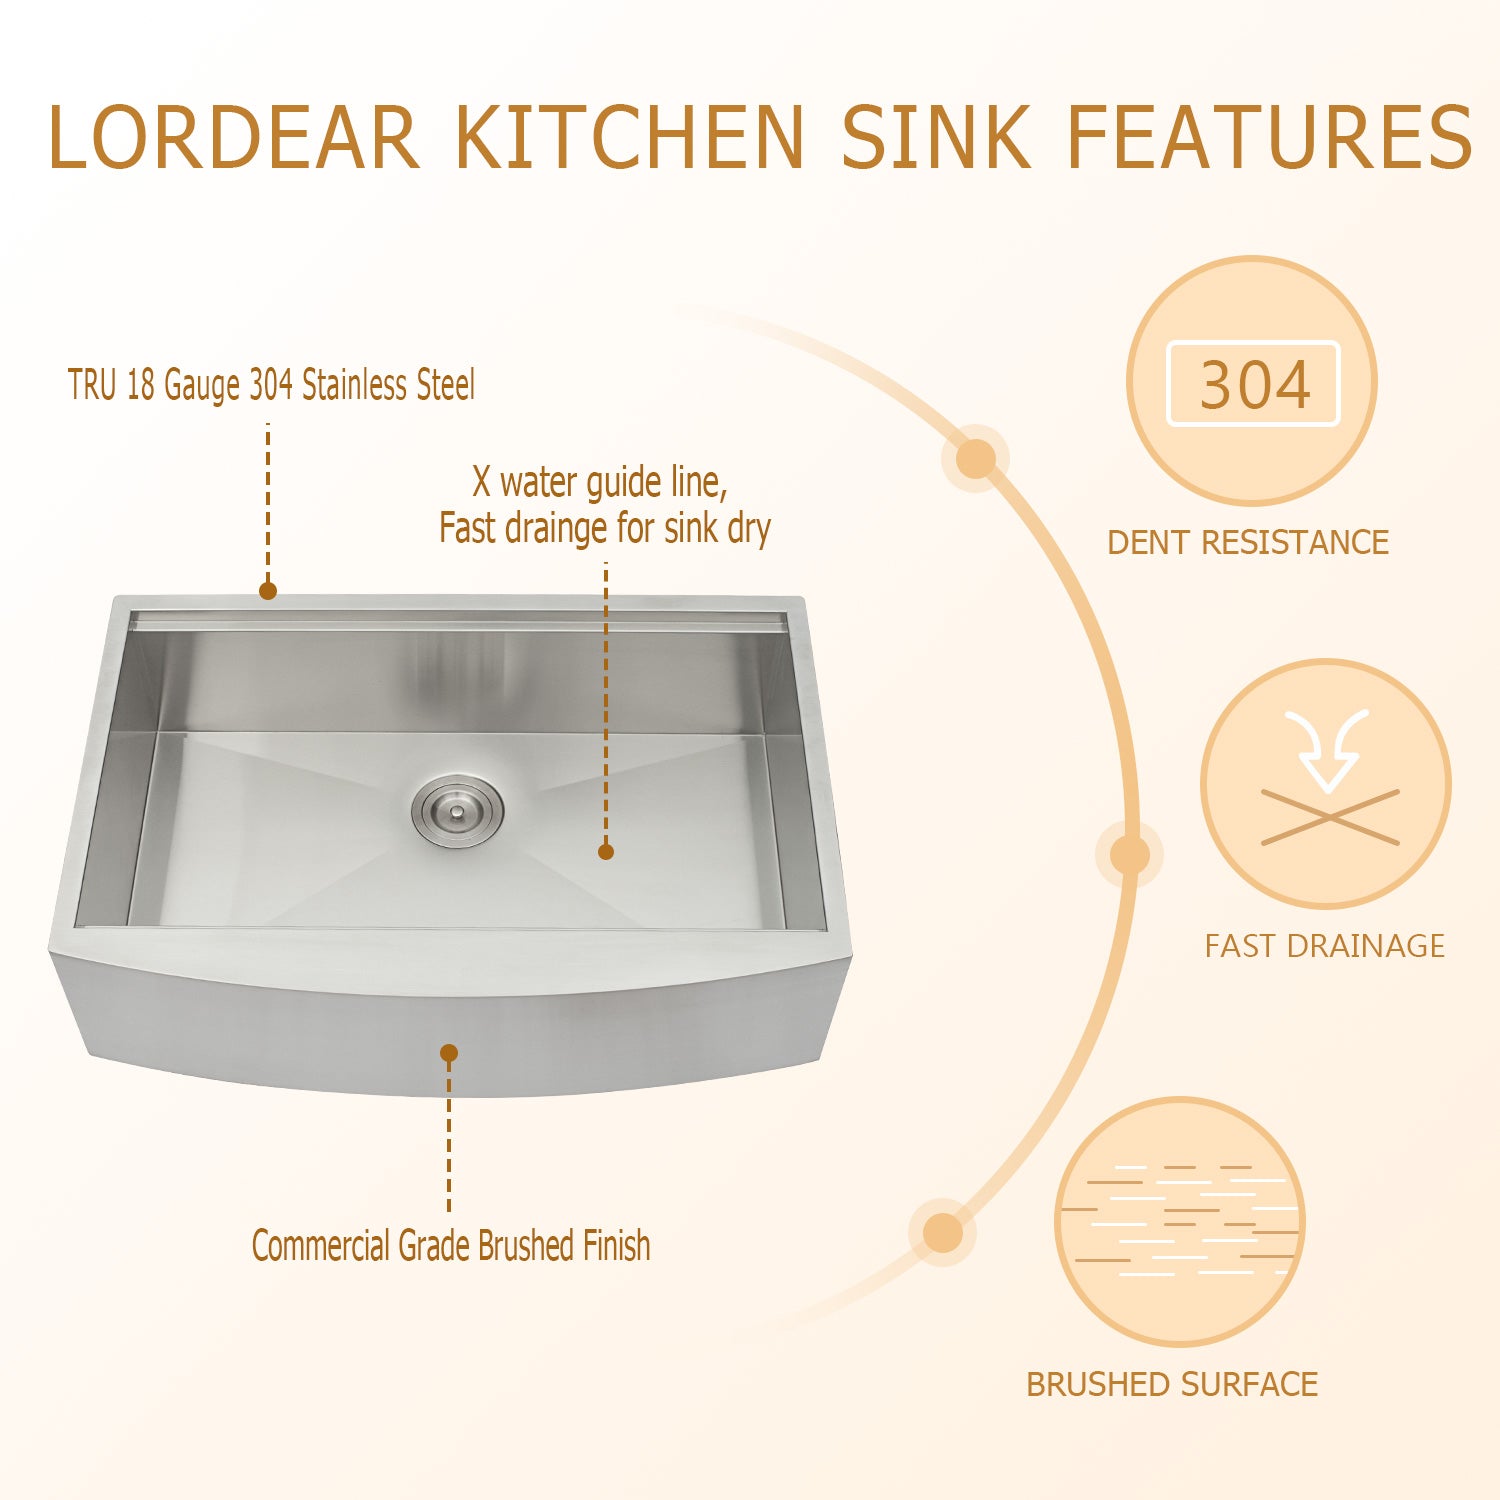 Lordear 33 Inch Farmhouse Sink - Stainless Steel Kitchen Sink with Ledge Workstation Apron Front 18 Gauge Single Bowl Farm Kitchen Sink | Big Deal, Kitchen Apron Front Sink, Kitchen Farmhouse Sink, Kitchen Workstation Sink | Lordear